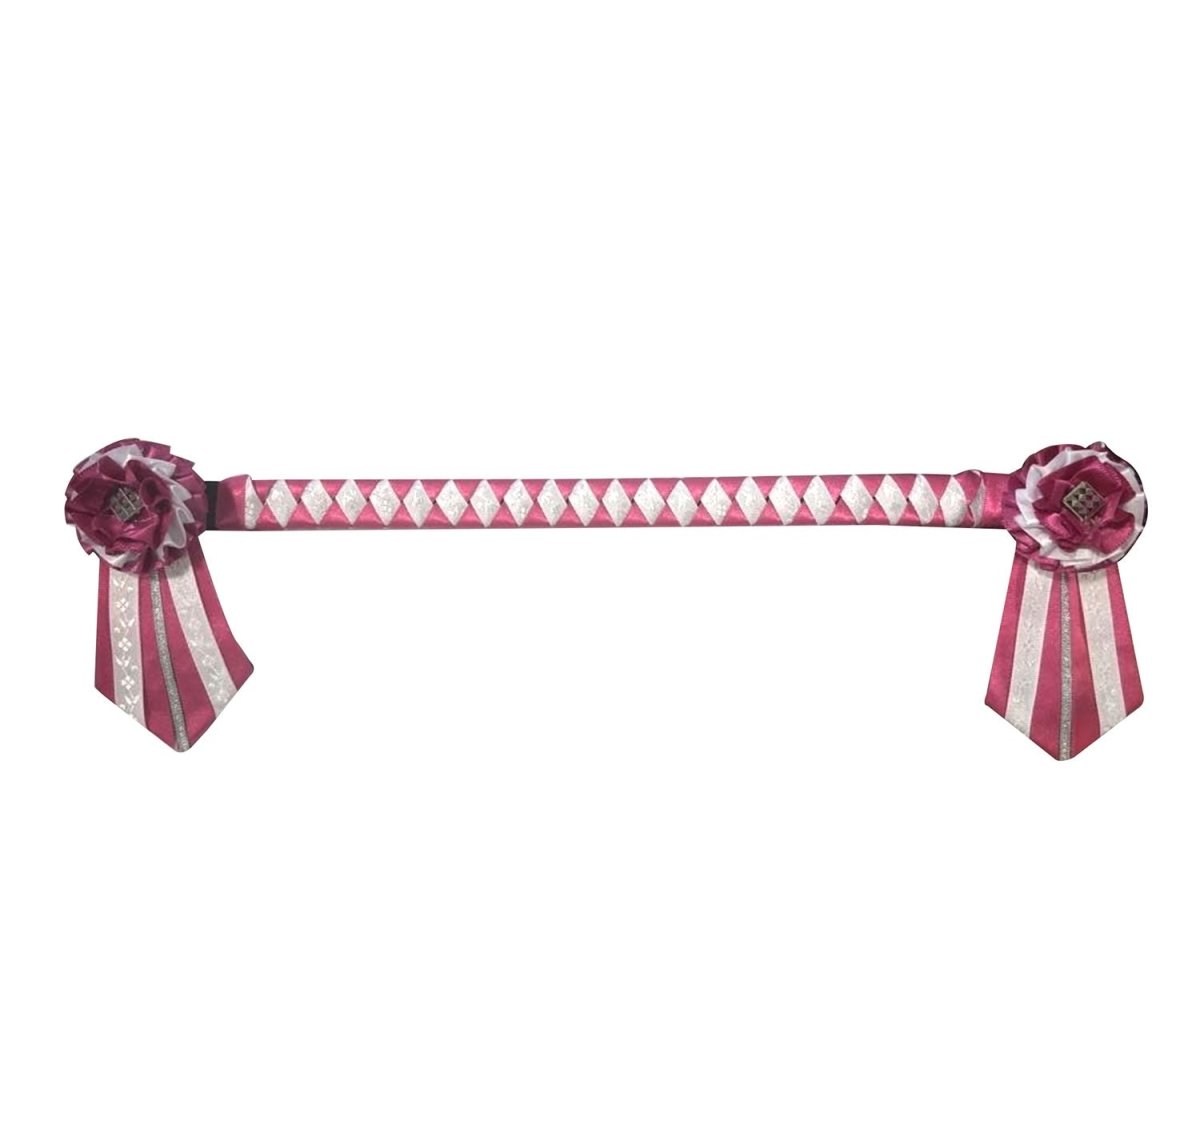 Showquest Browband Camden - Cerise/White - Pony